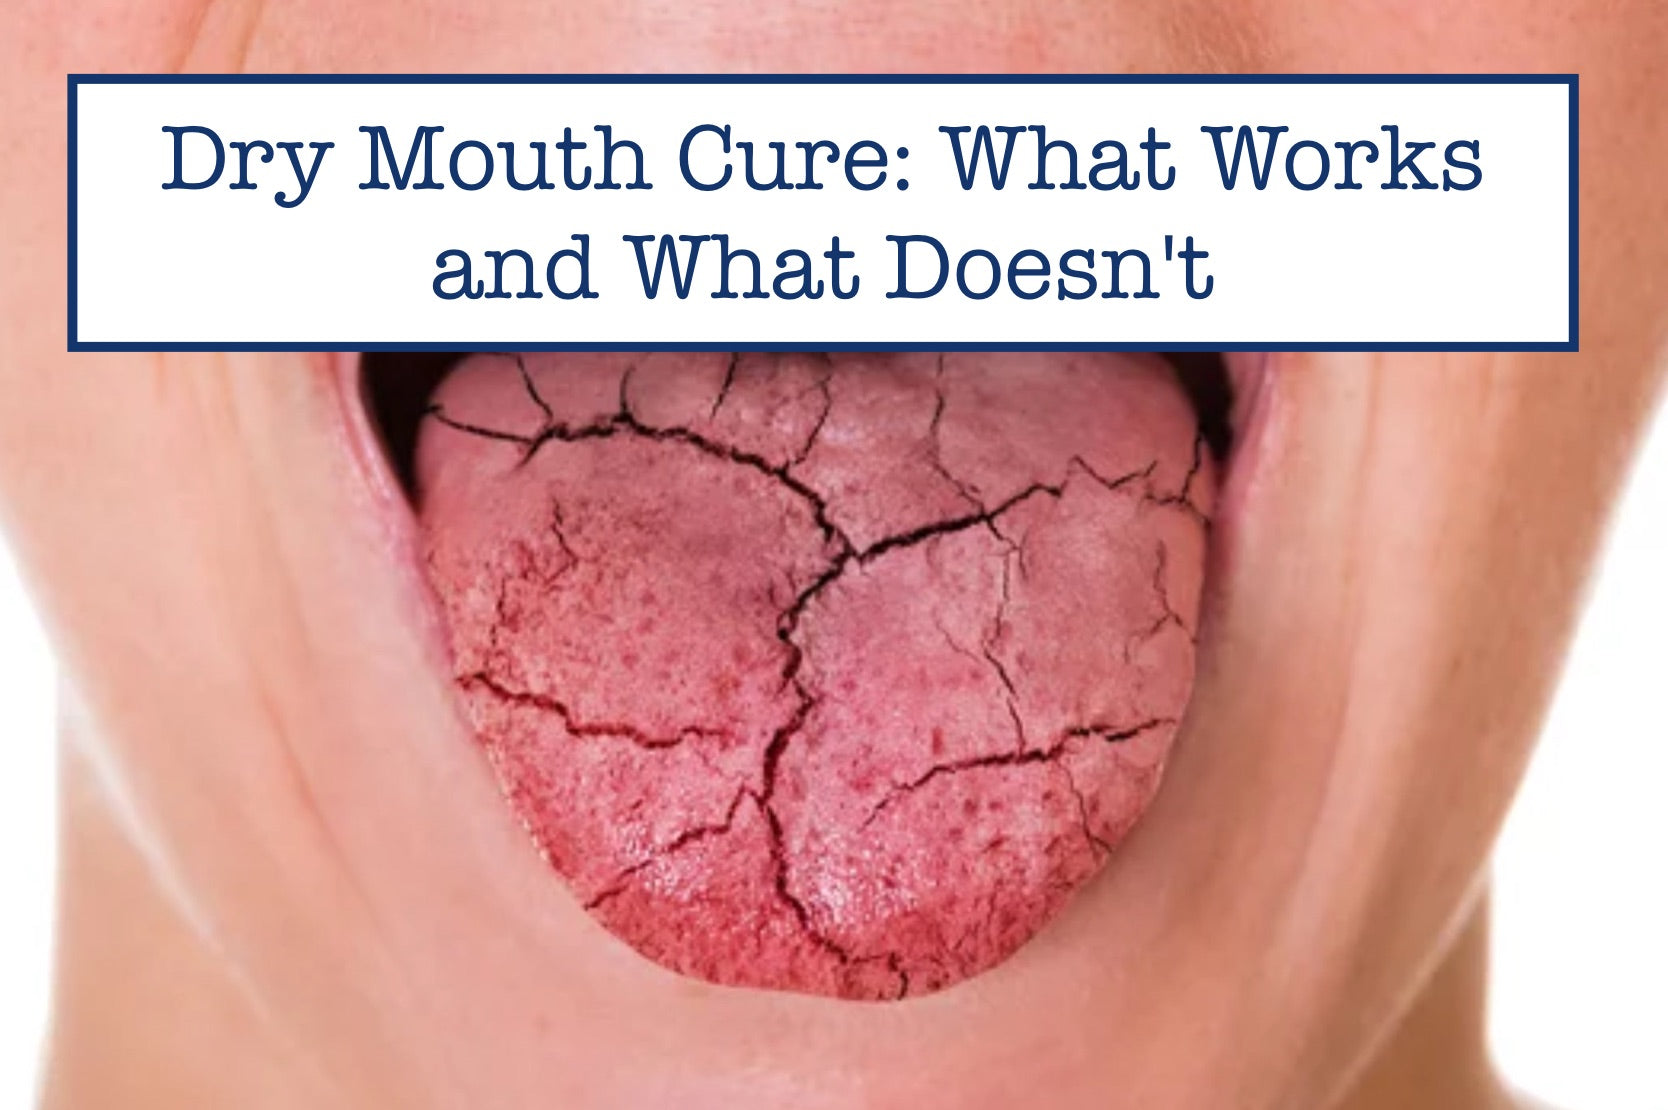 Dry Mouth Cure: What Works and What Doesn't